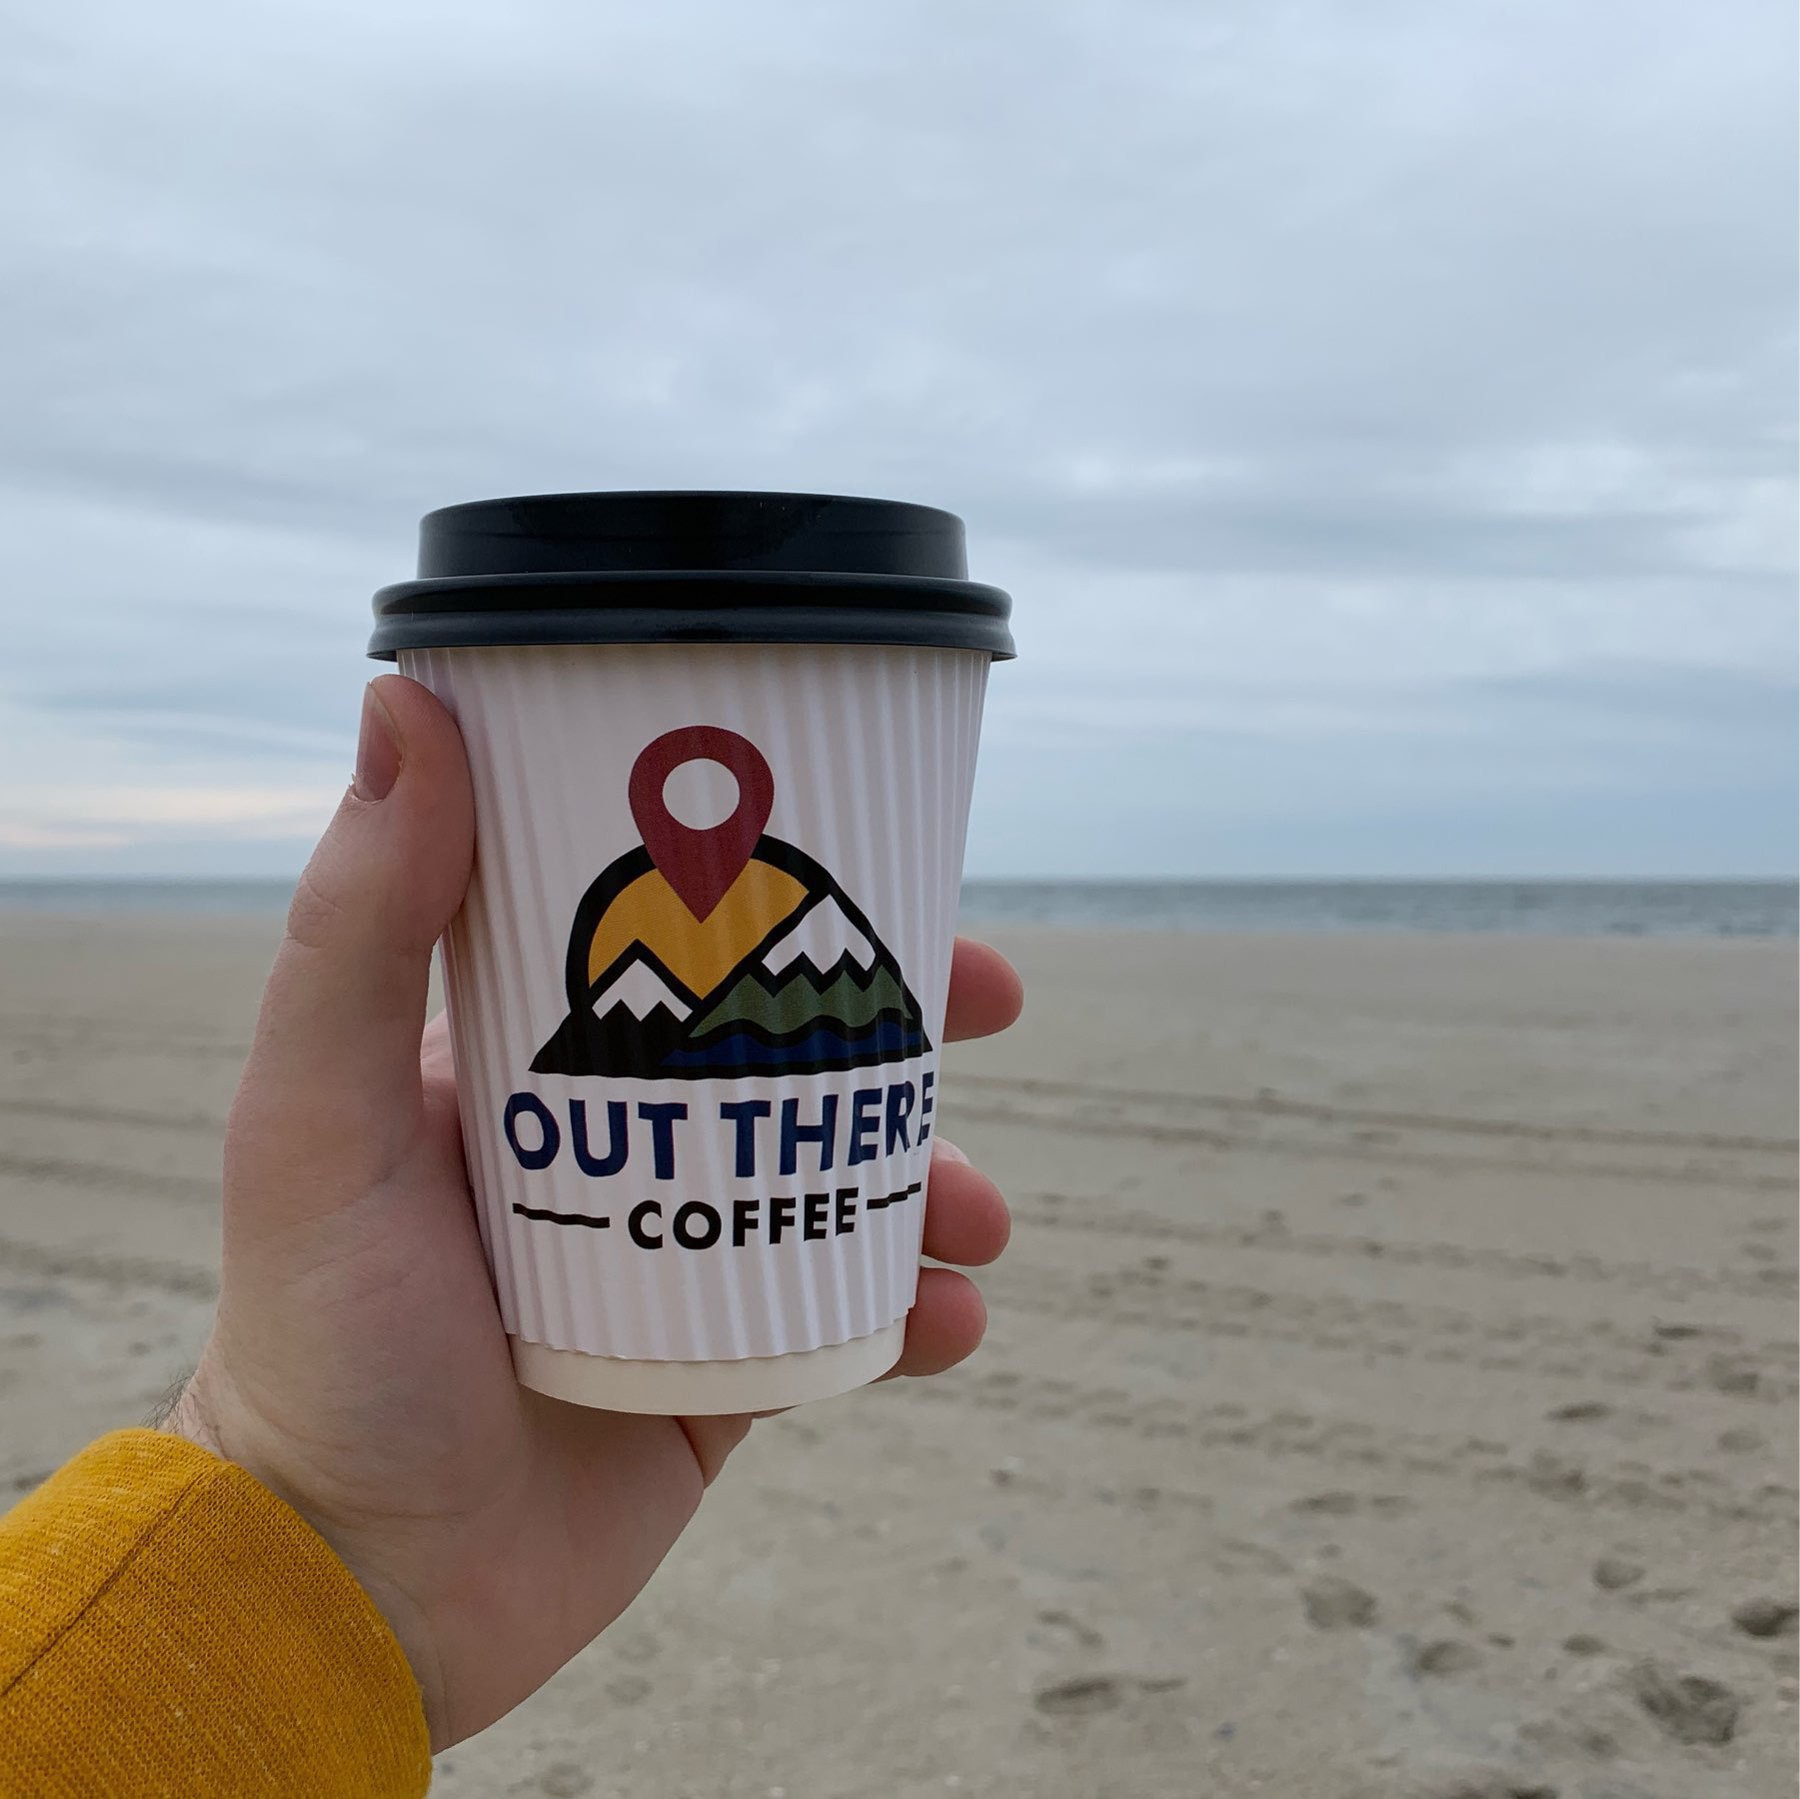 Coffee cup in foreground, Atlantic Ocean in the background.